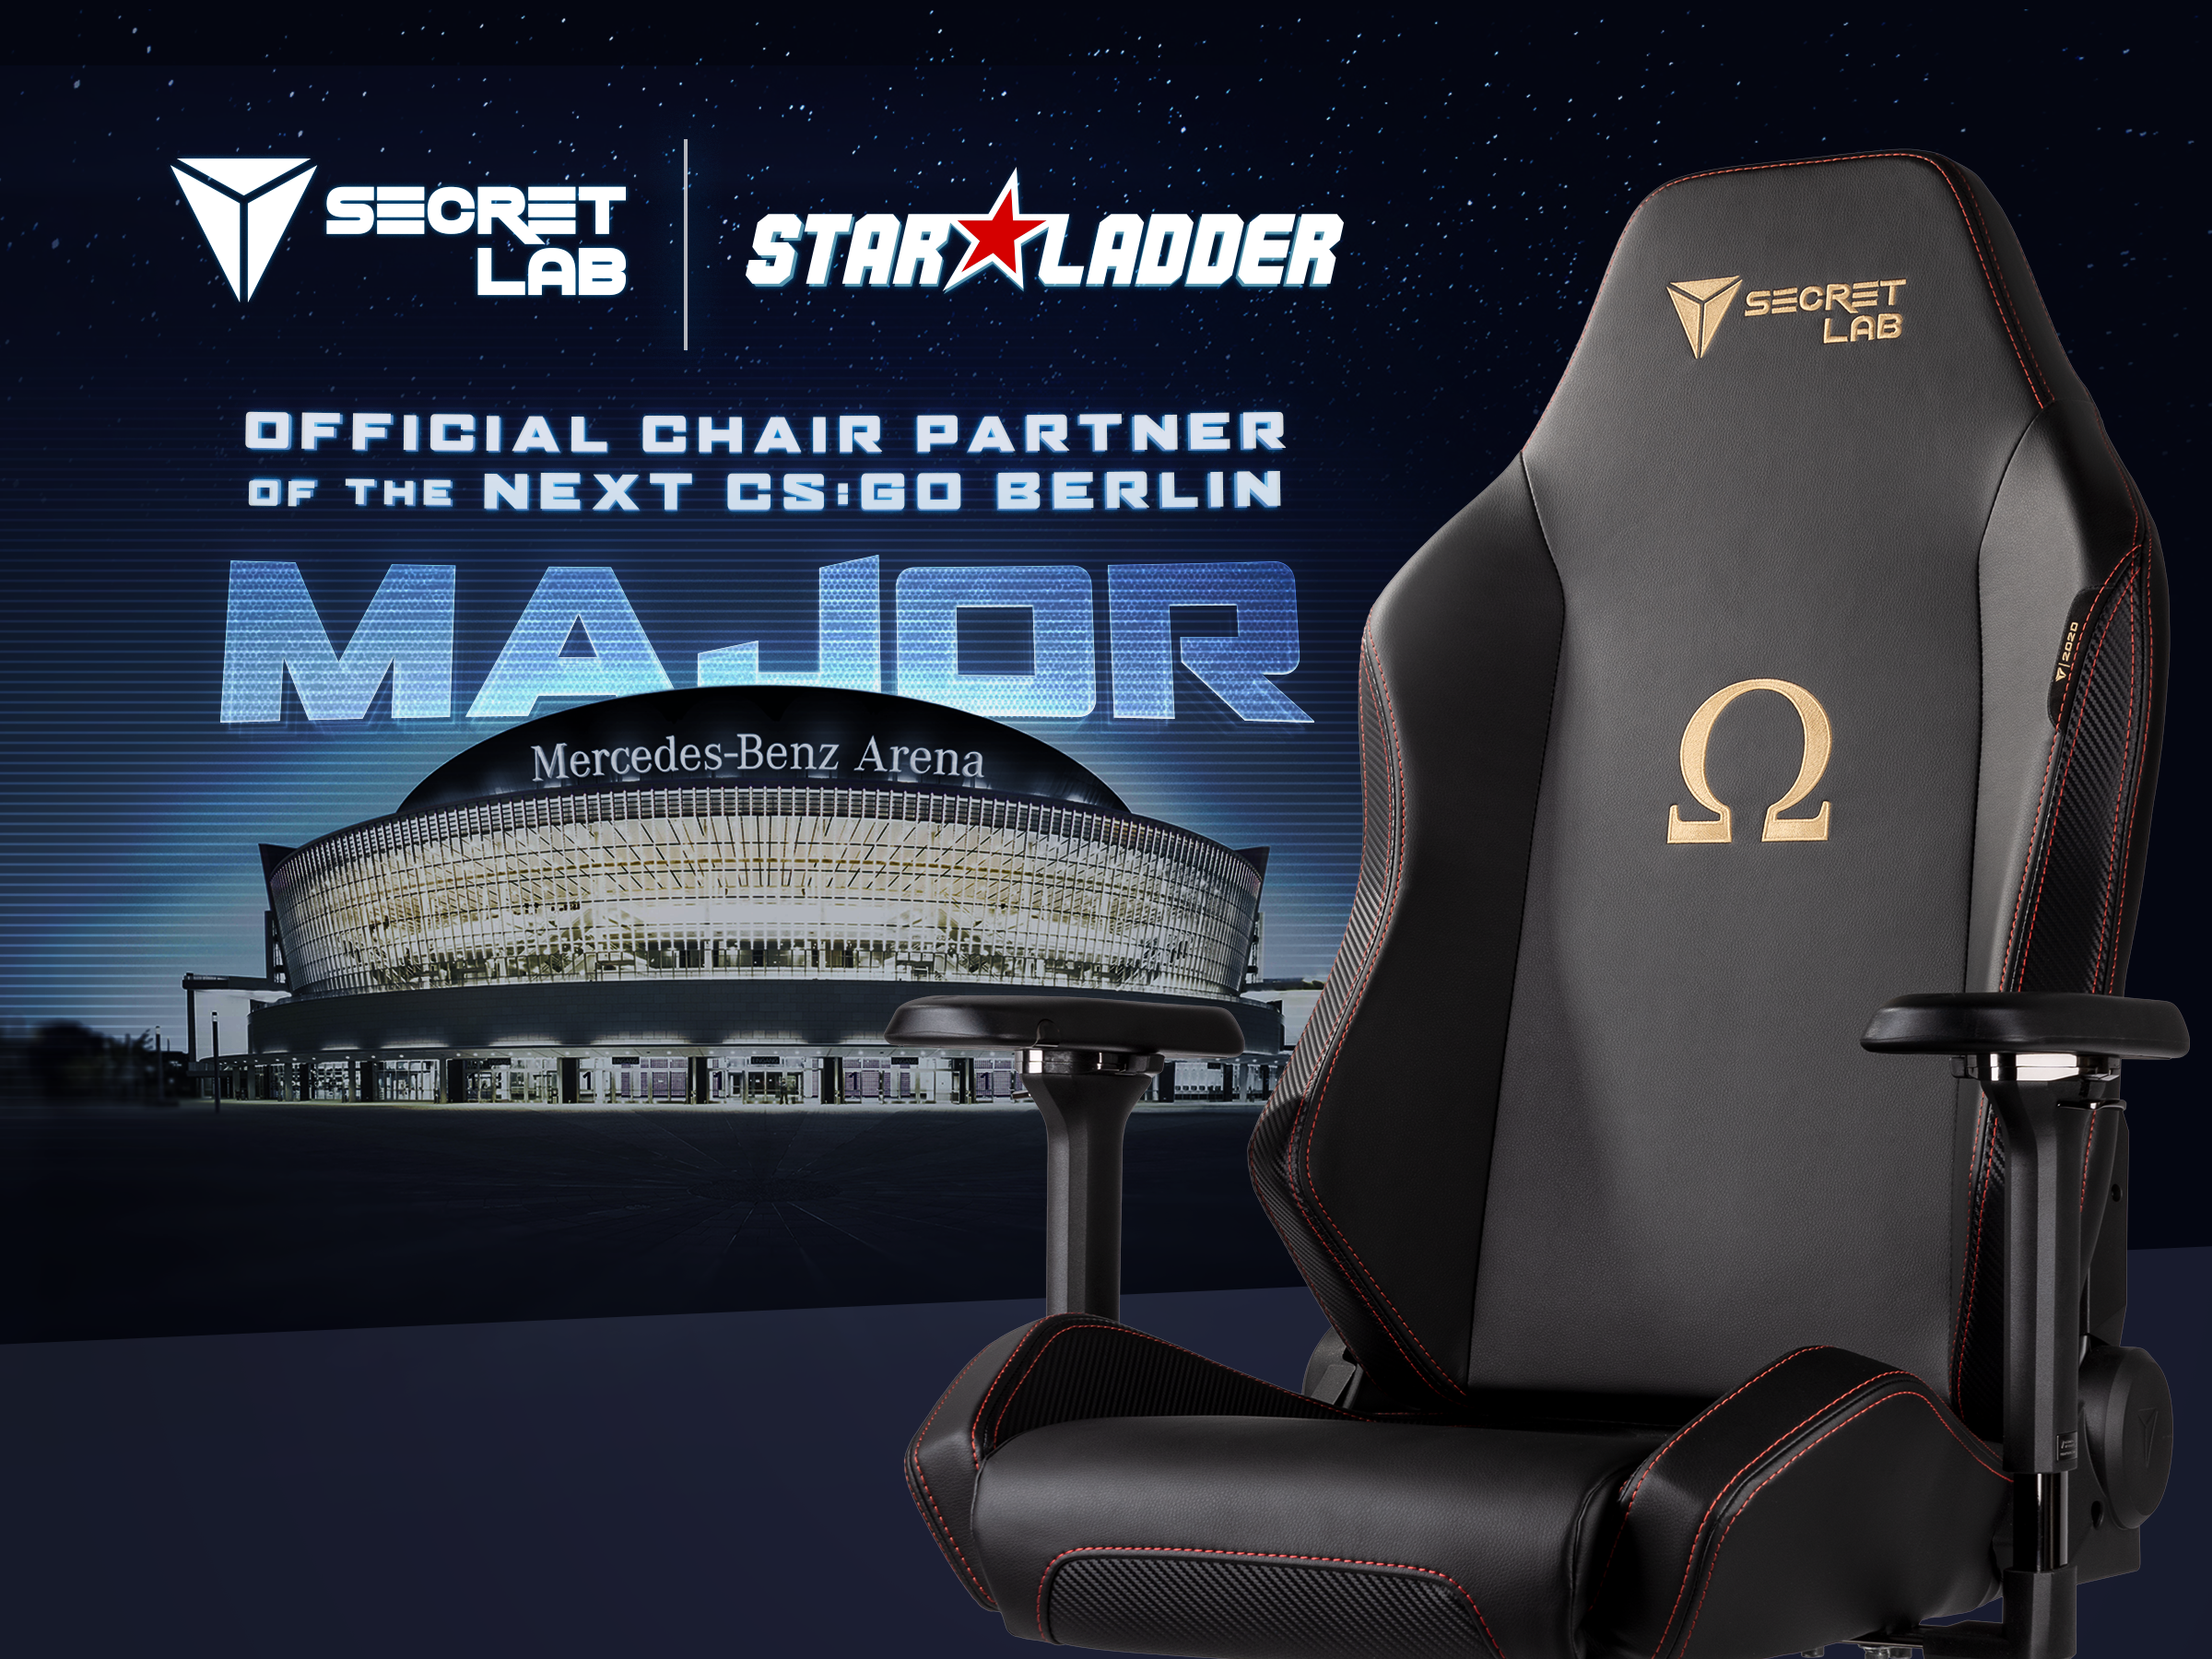 Secretlab – the gaming seats of choice for the CS:GO StarLadder Berlin Major 2019